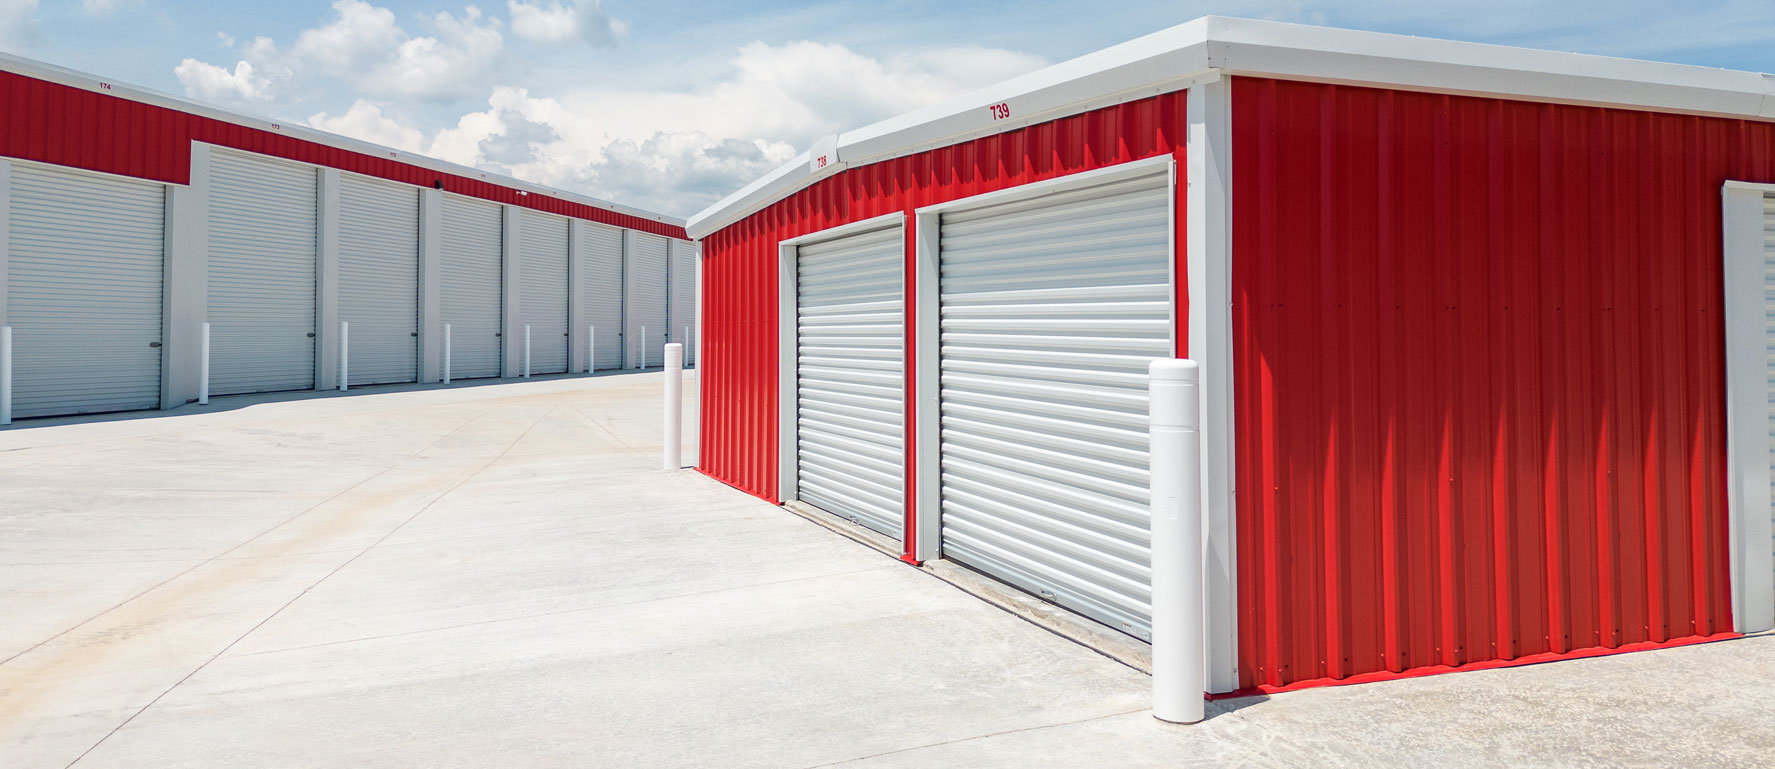 red and white RV storage facility